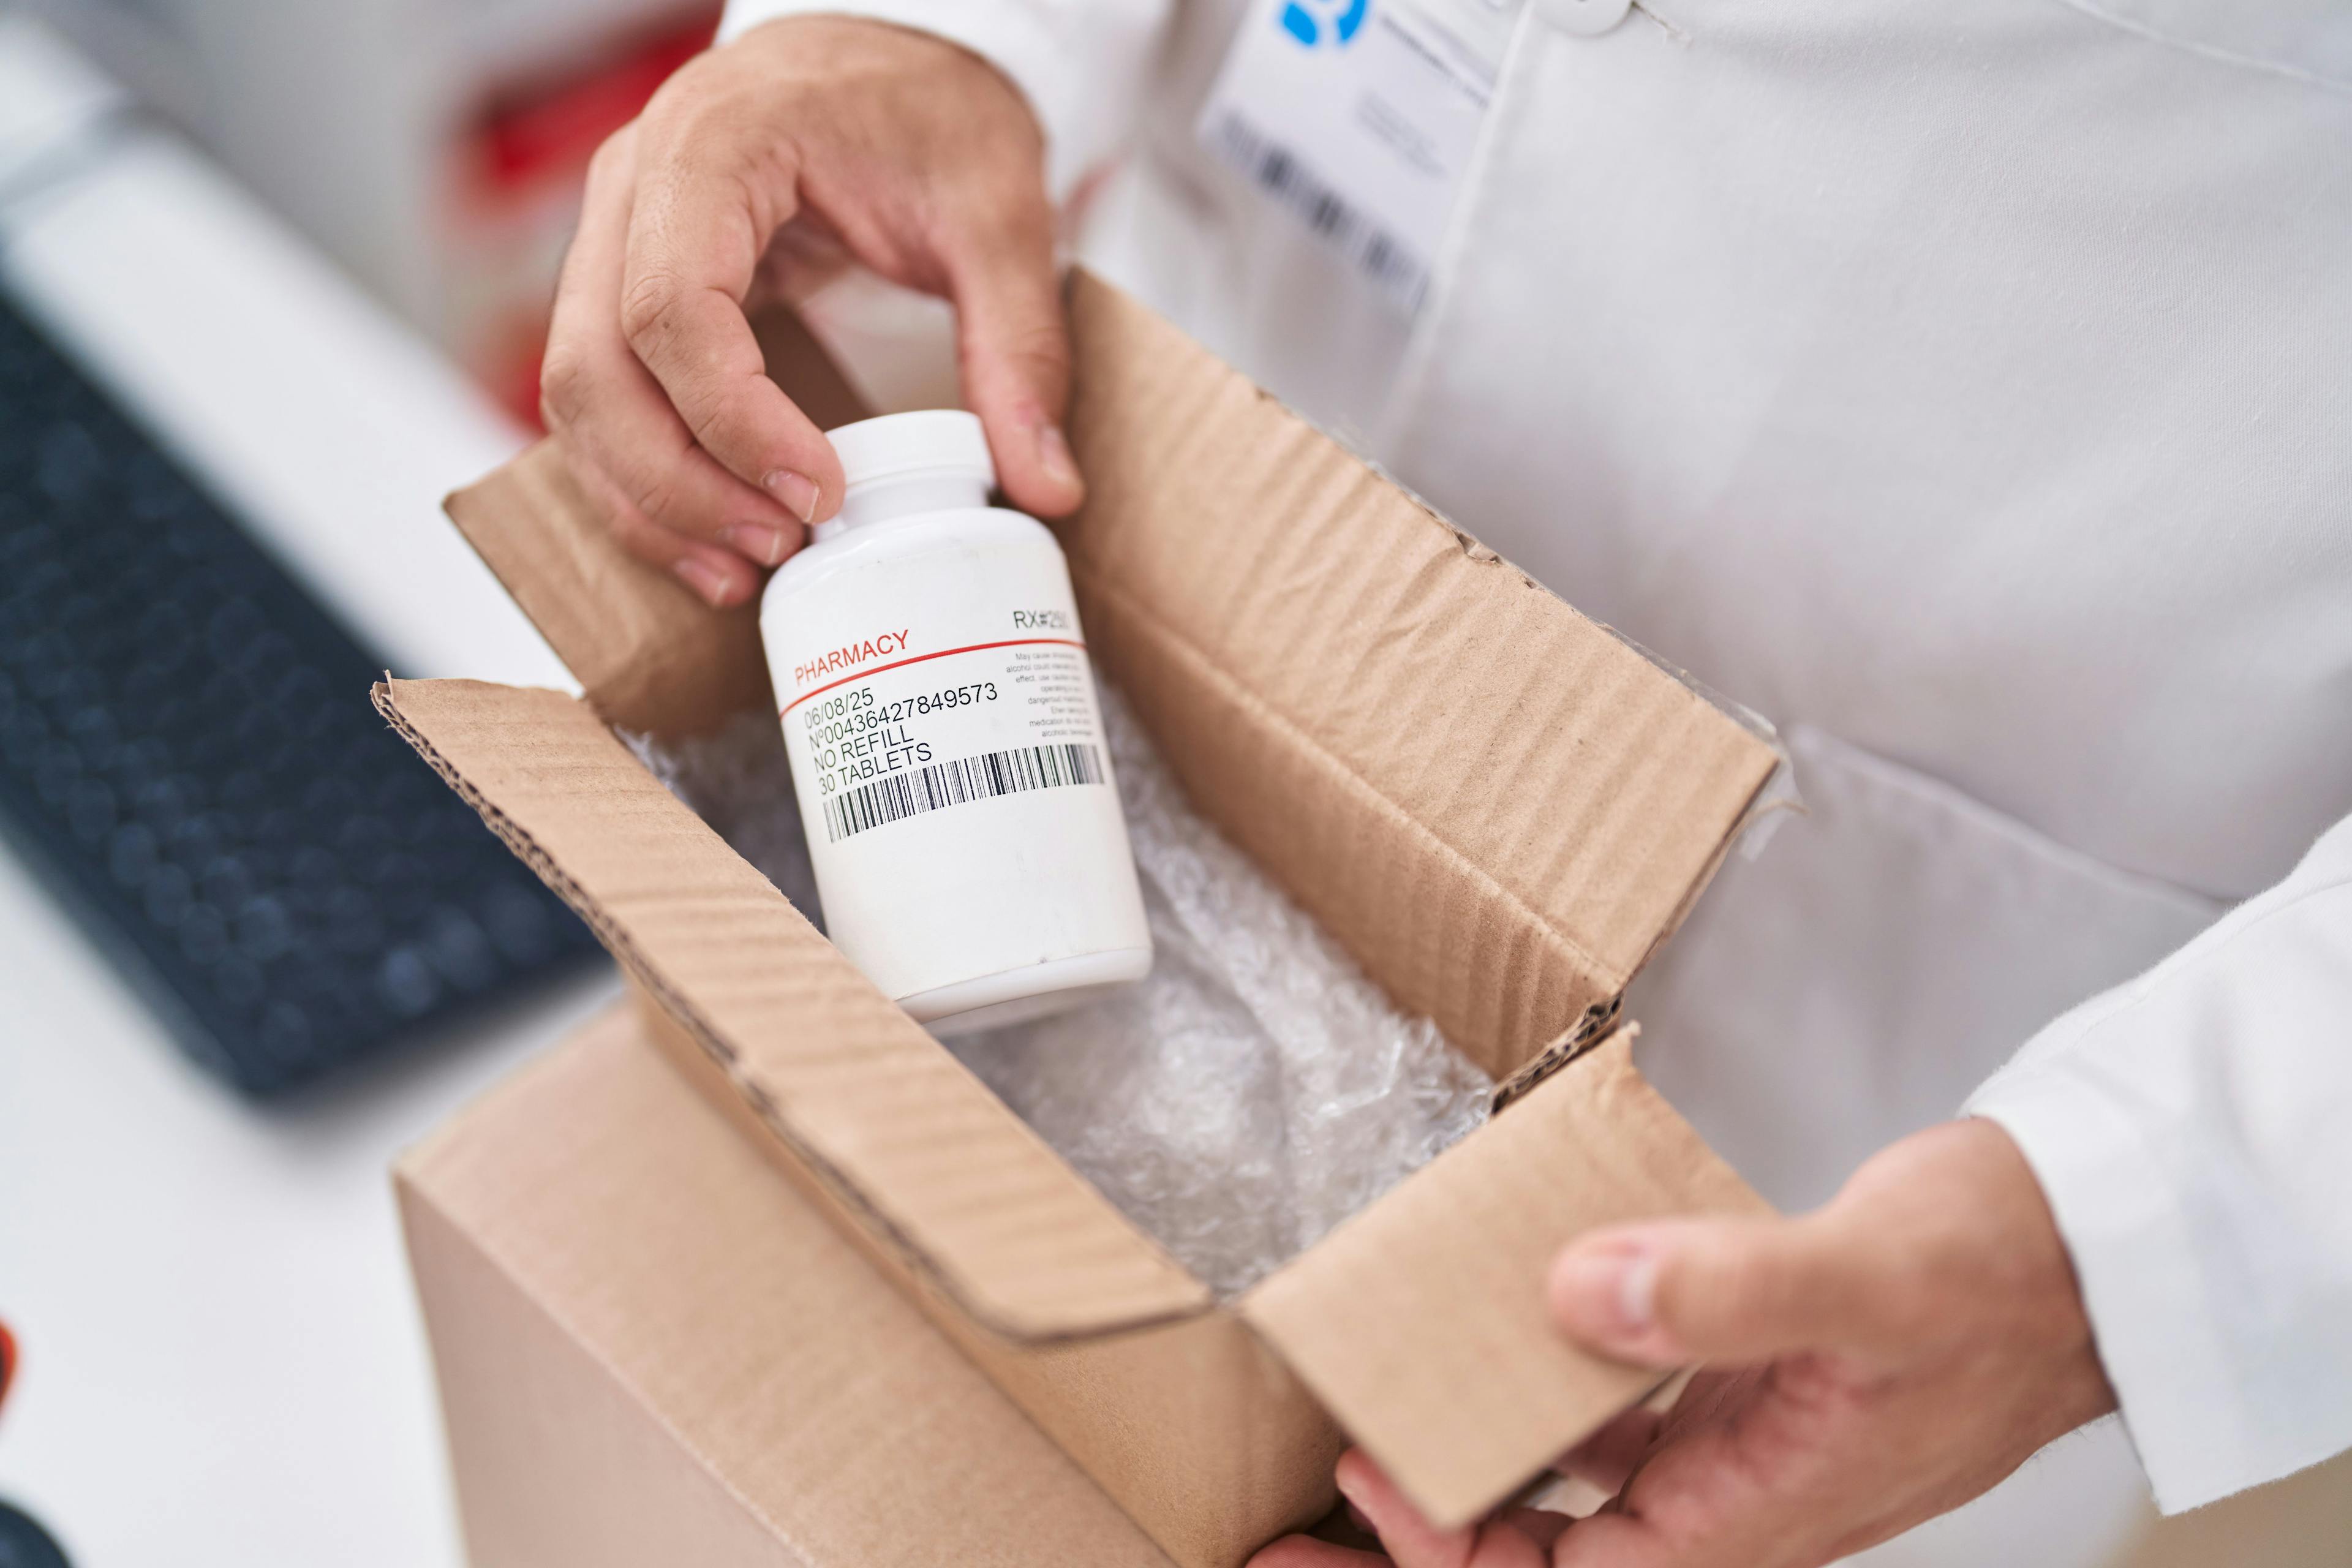 What You Need to Know About the Drug Supply Chain Security Act Before November’s Deadline